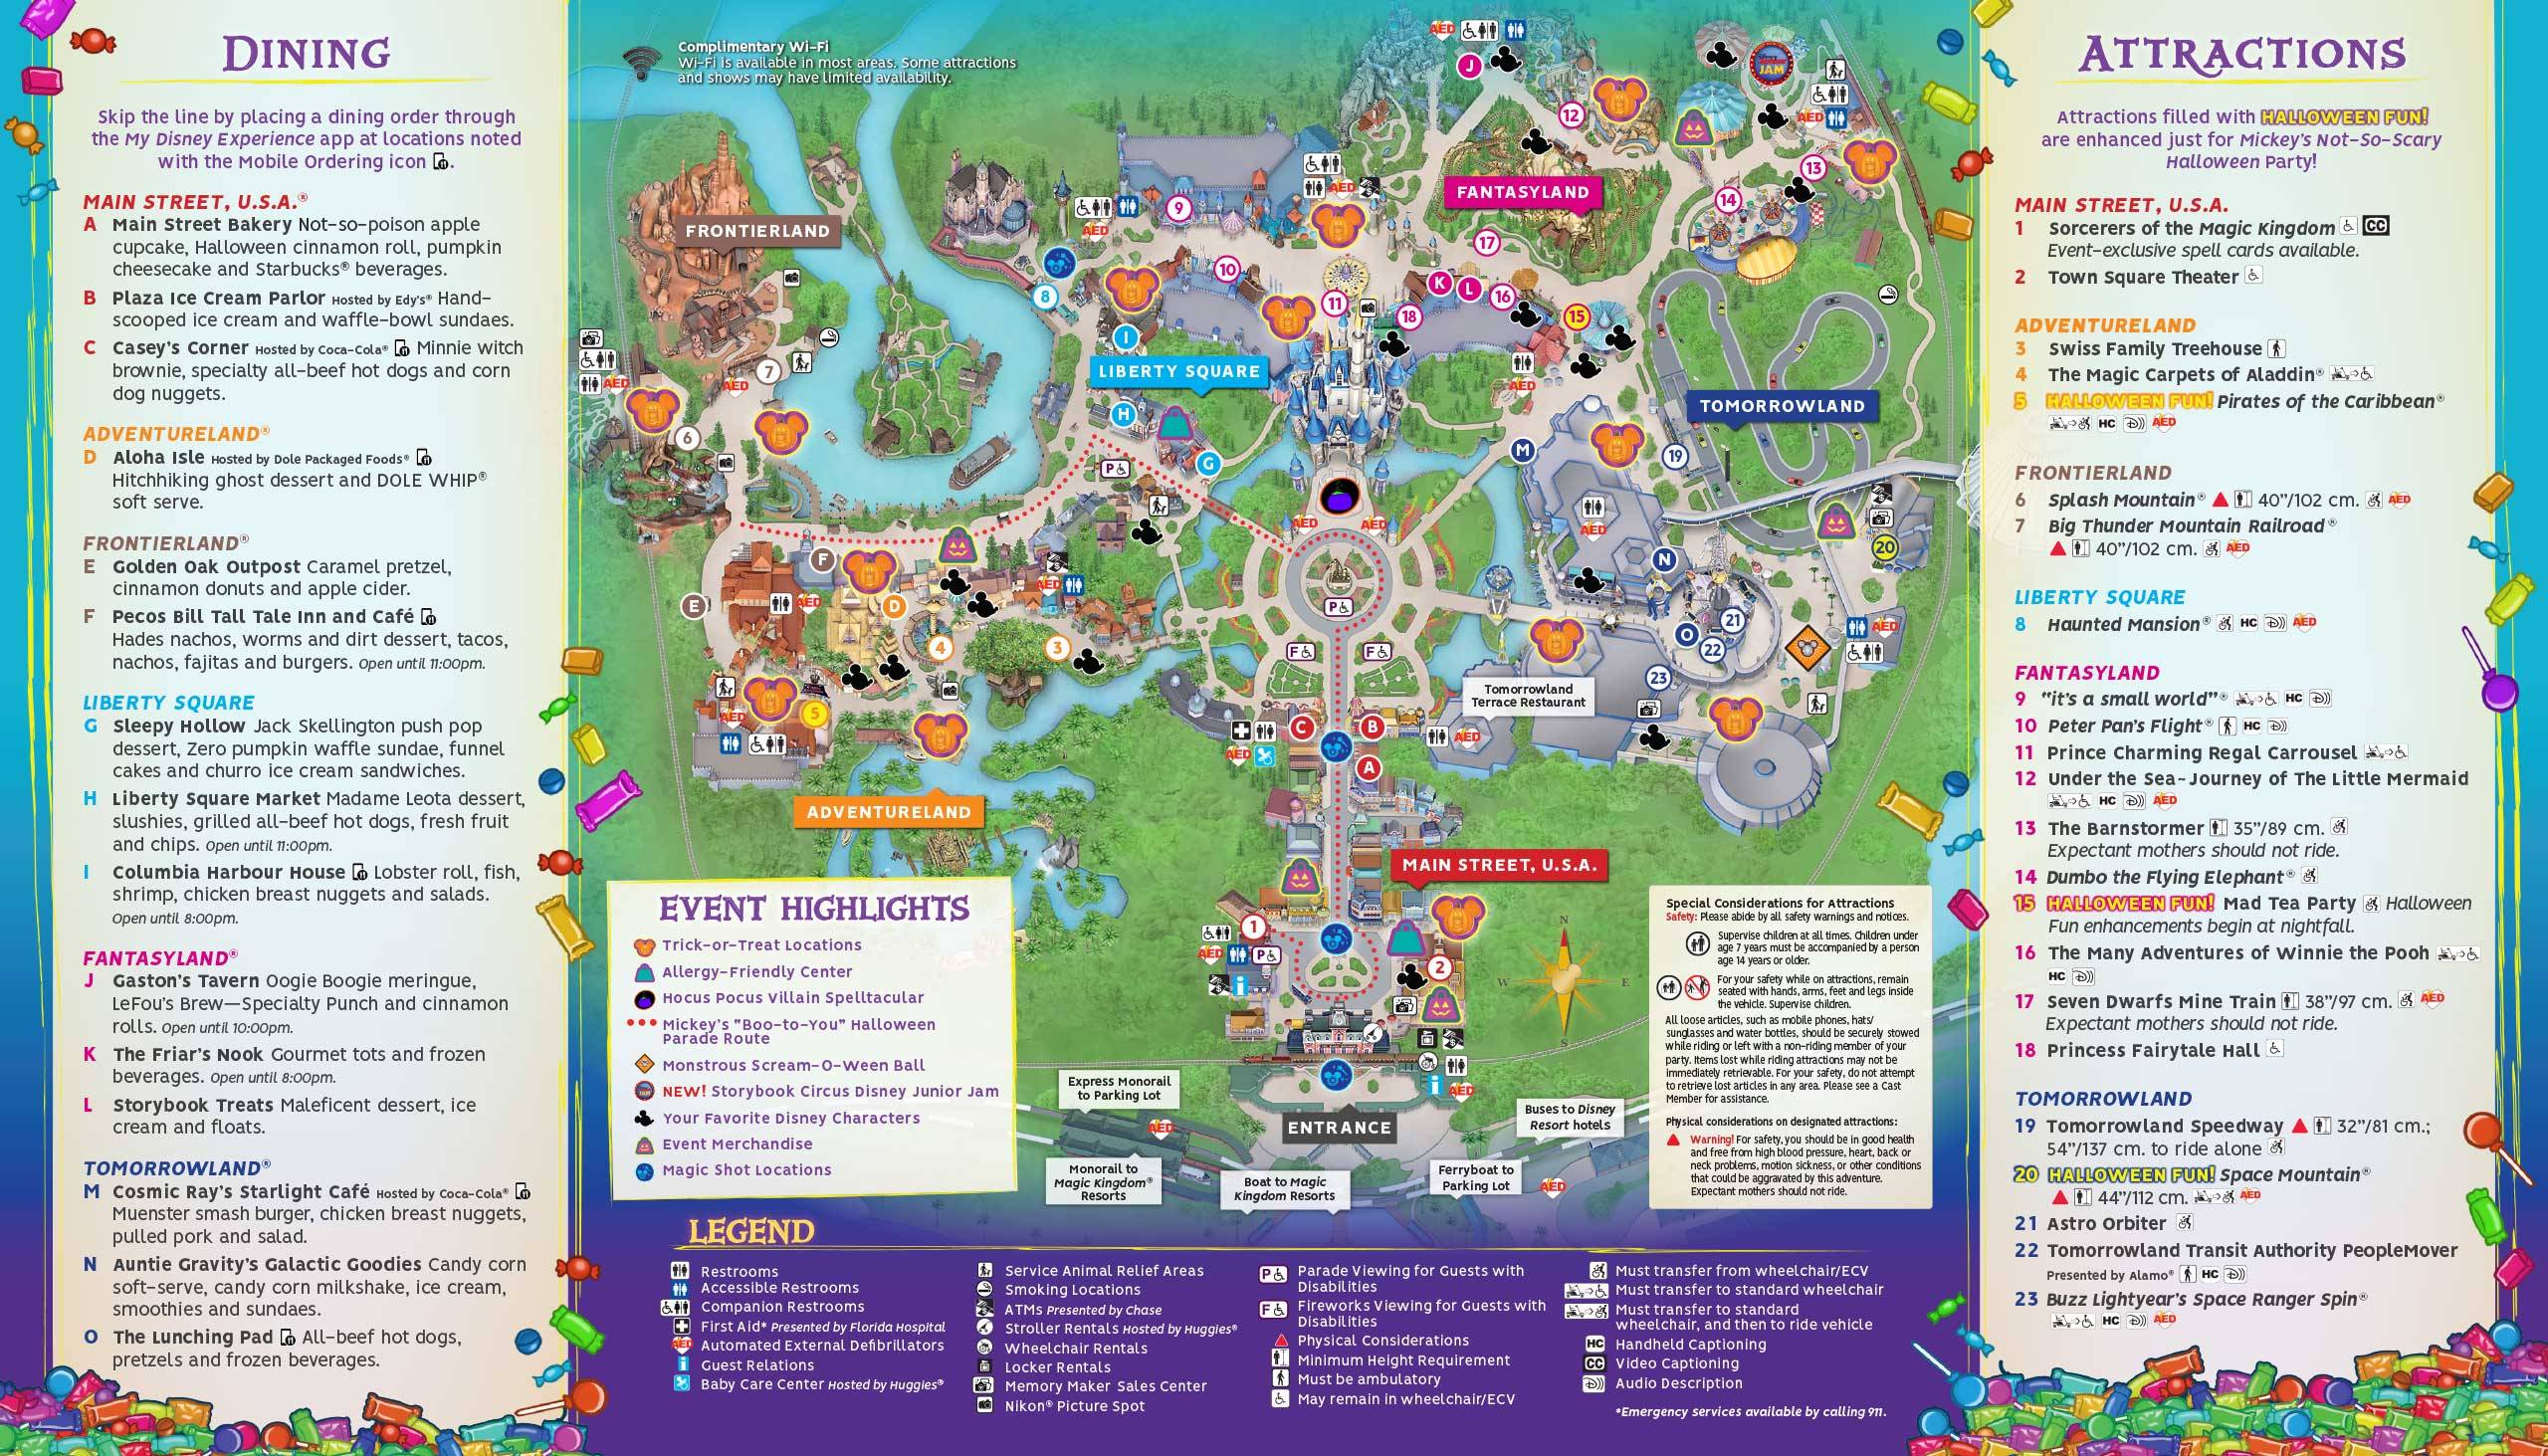 Mickey's Not-So-Scary Halloween Party 2018 guide map - Back